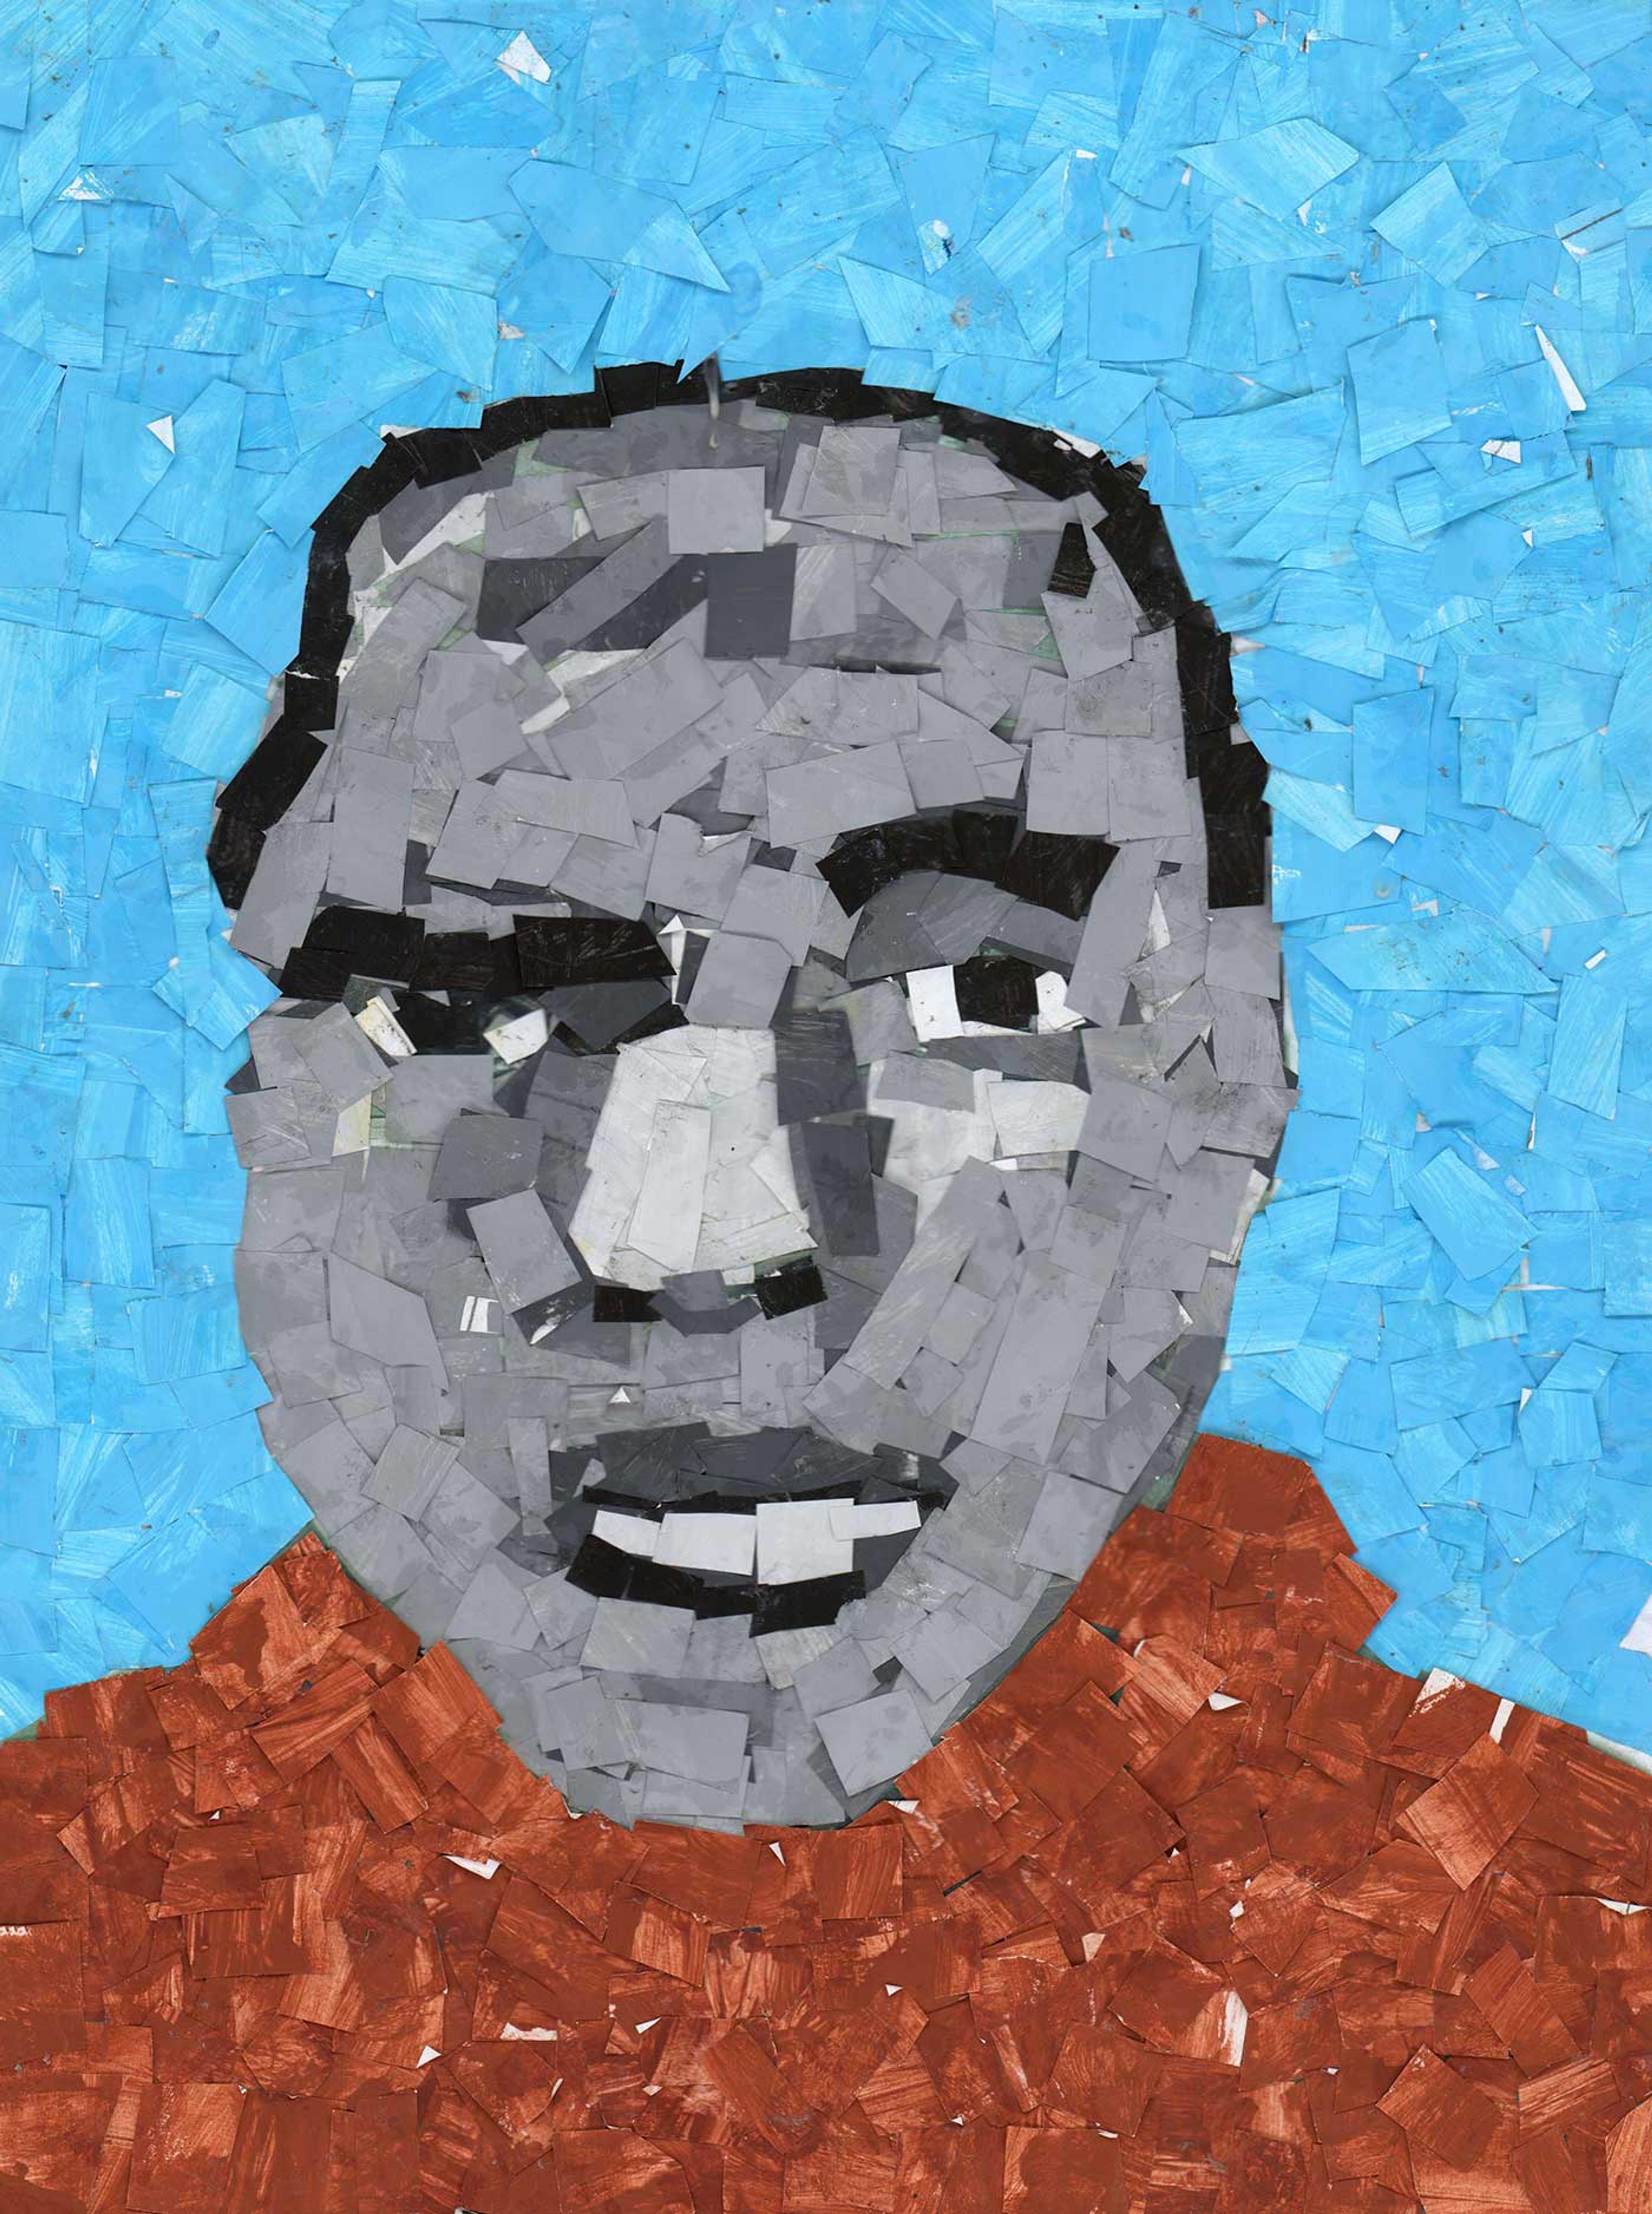 Mosaic portrait done in gray on a blue background.